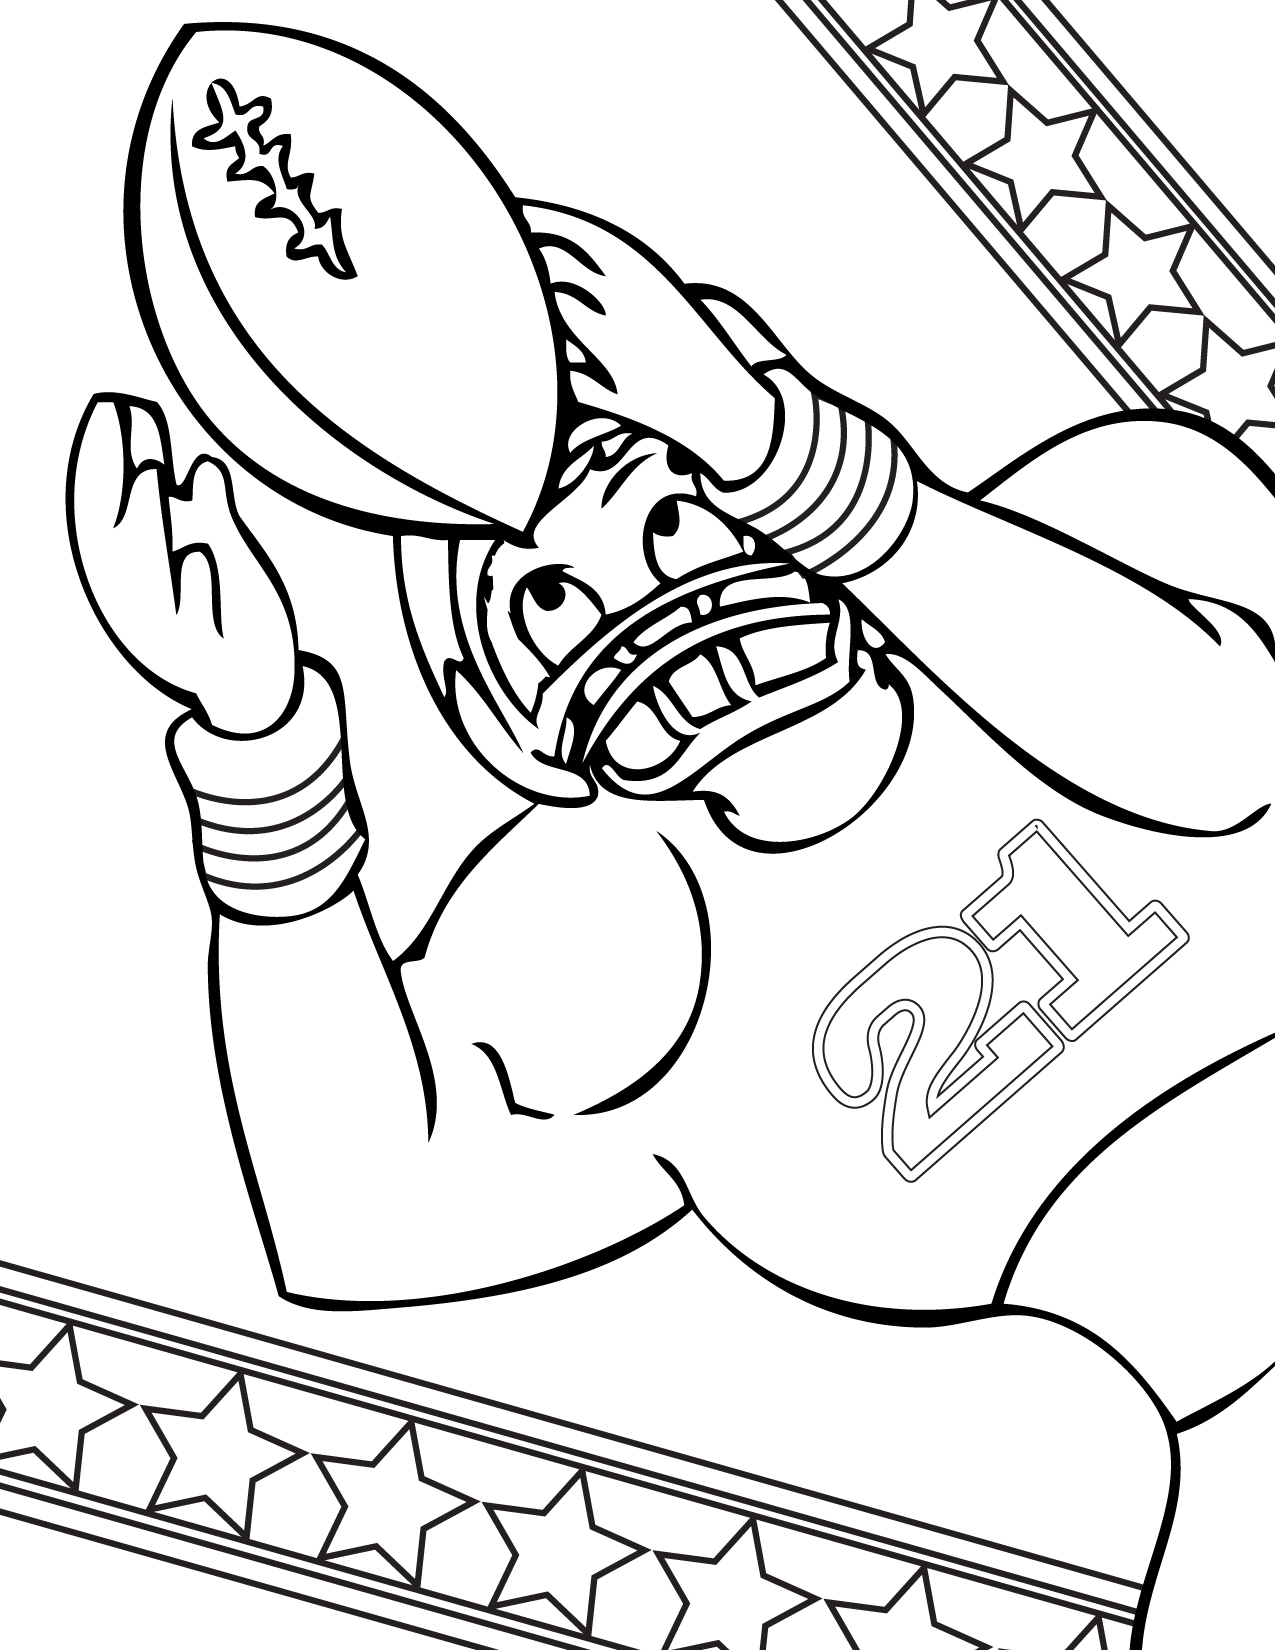 Printable Sports Coloring Pages | ColoringMe.com